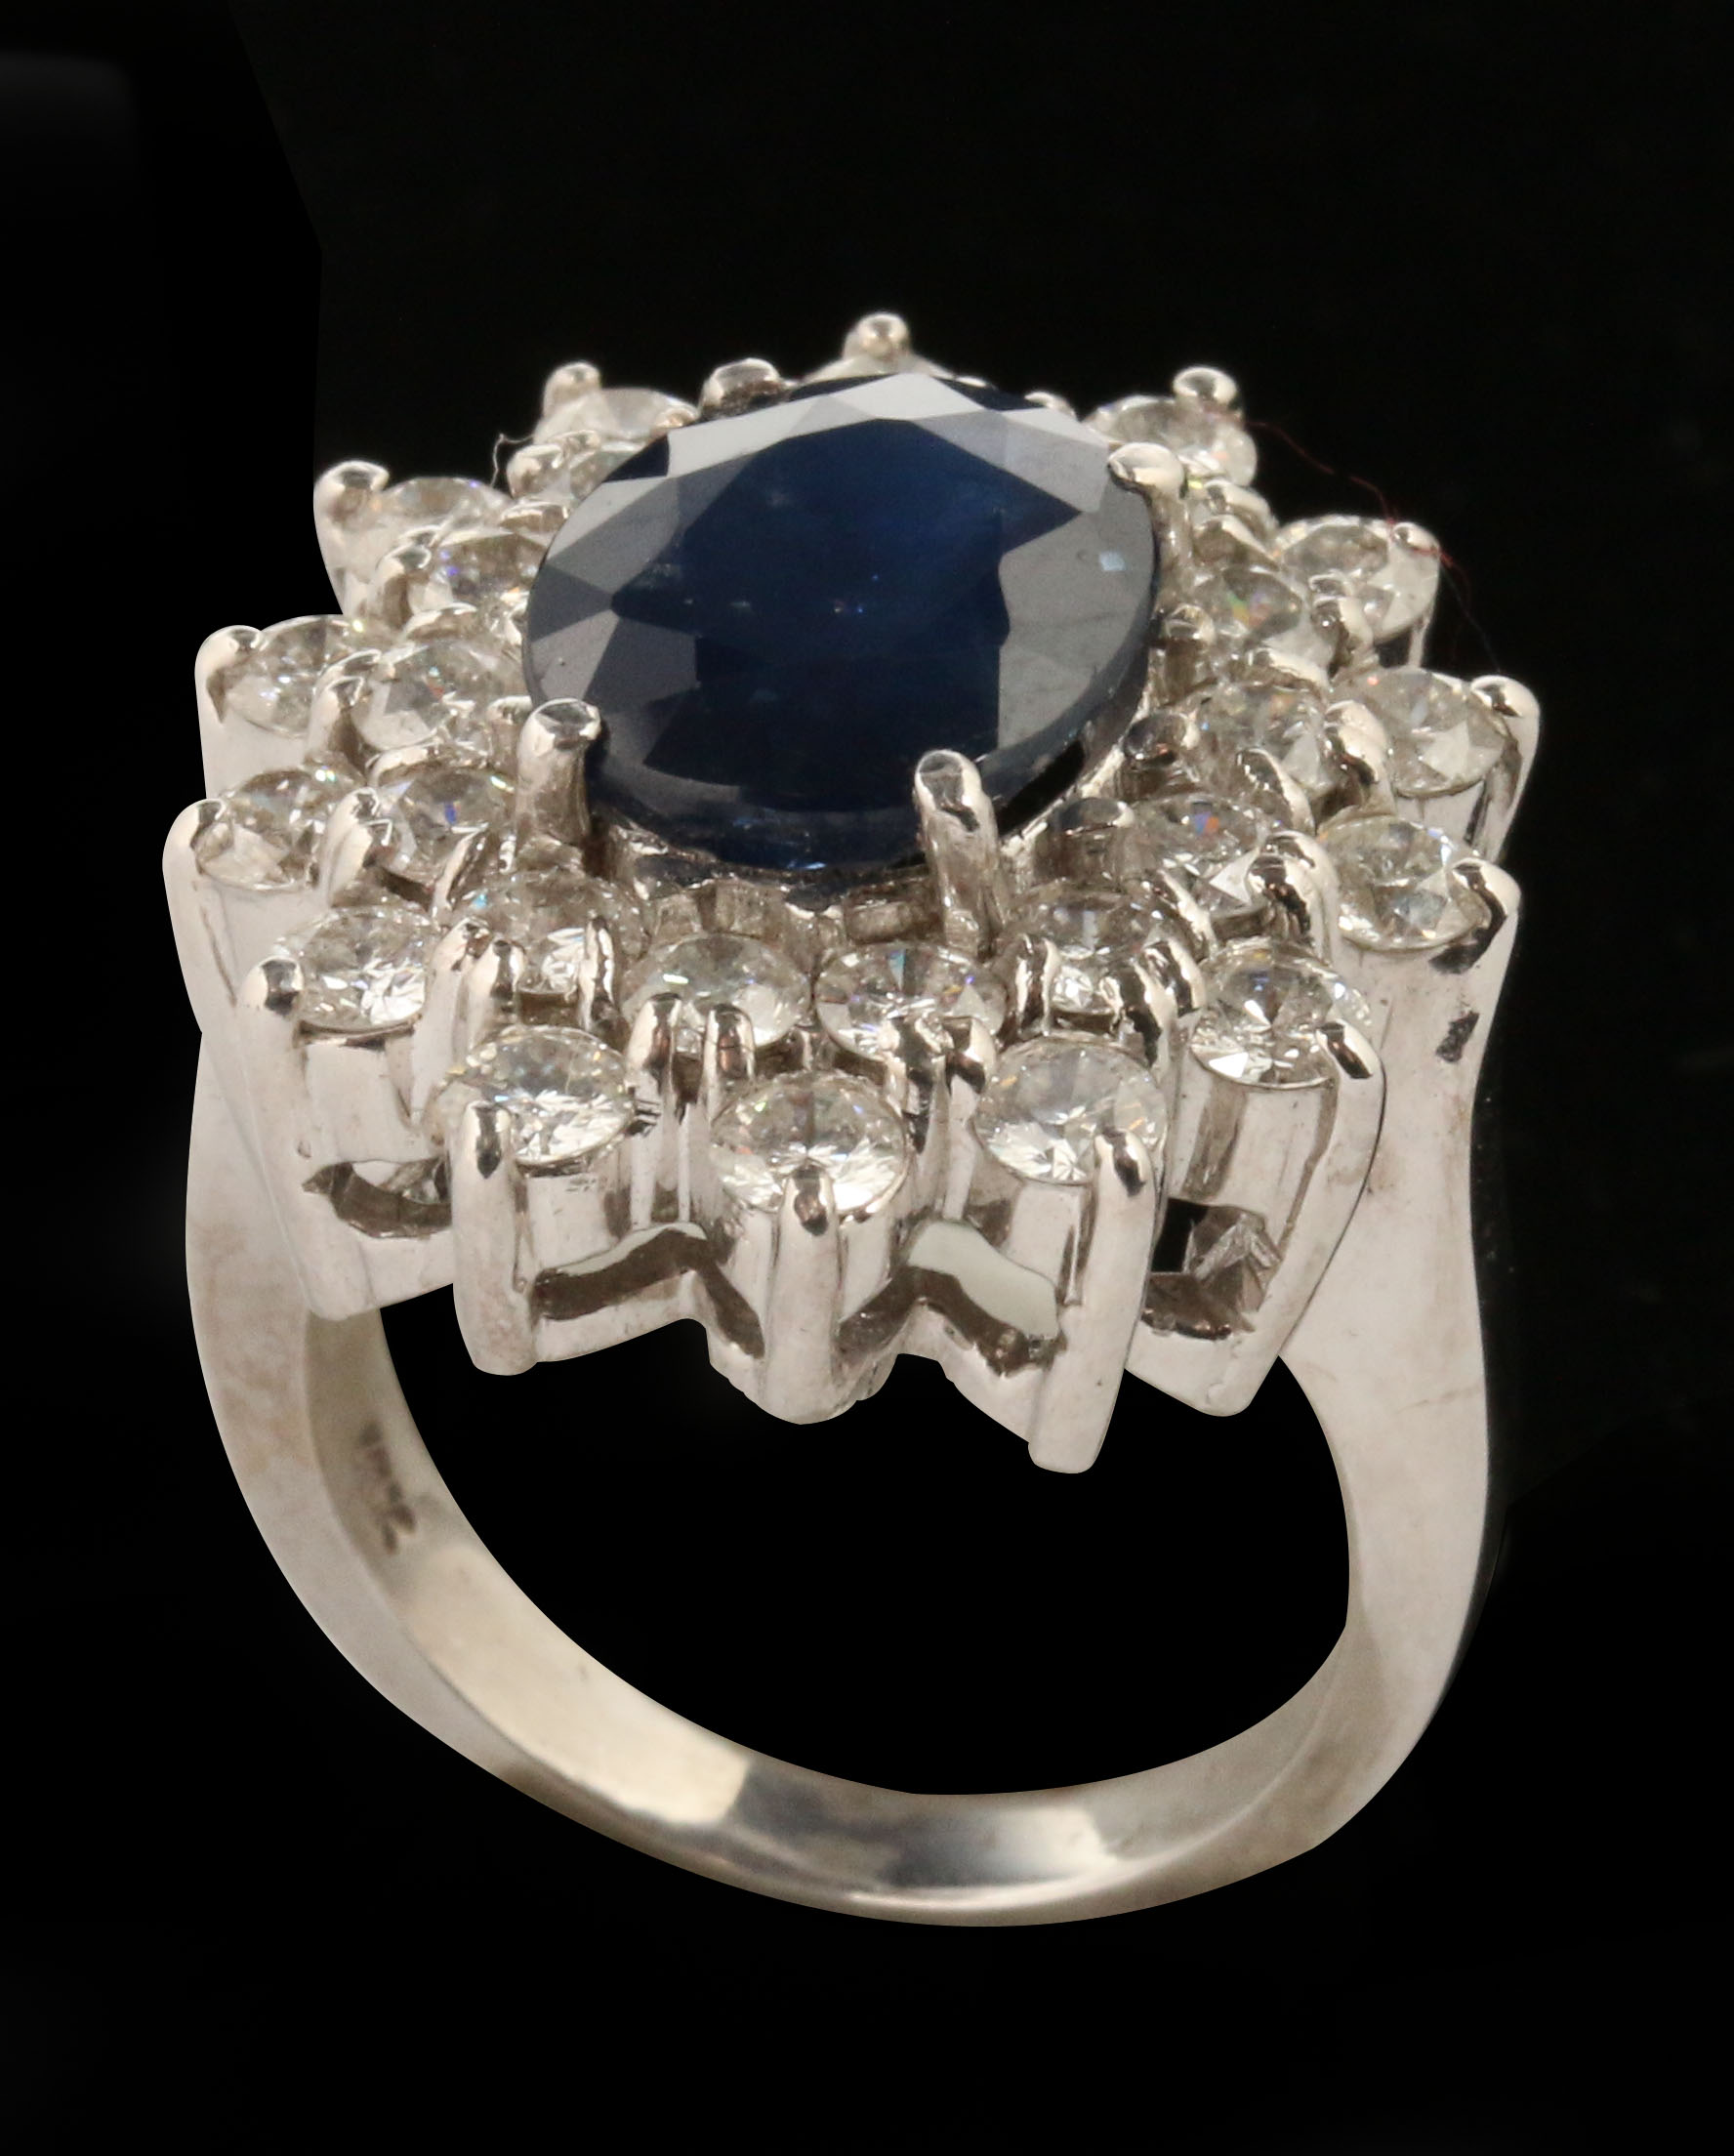 AN 18K OVAL SAPPHIRE AND DIAMOND COCKTAIL RING